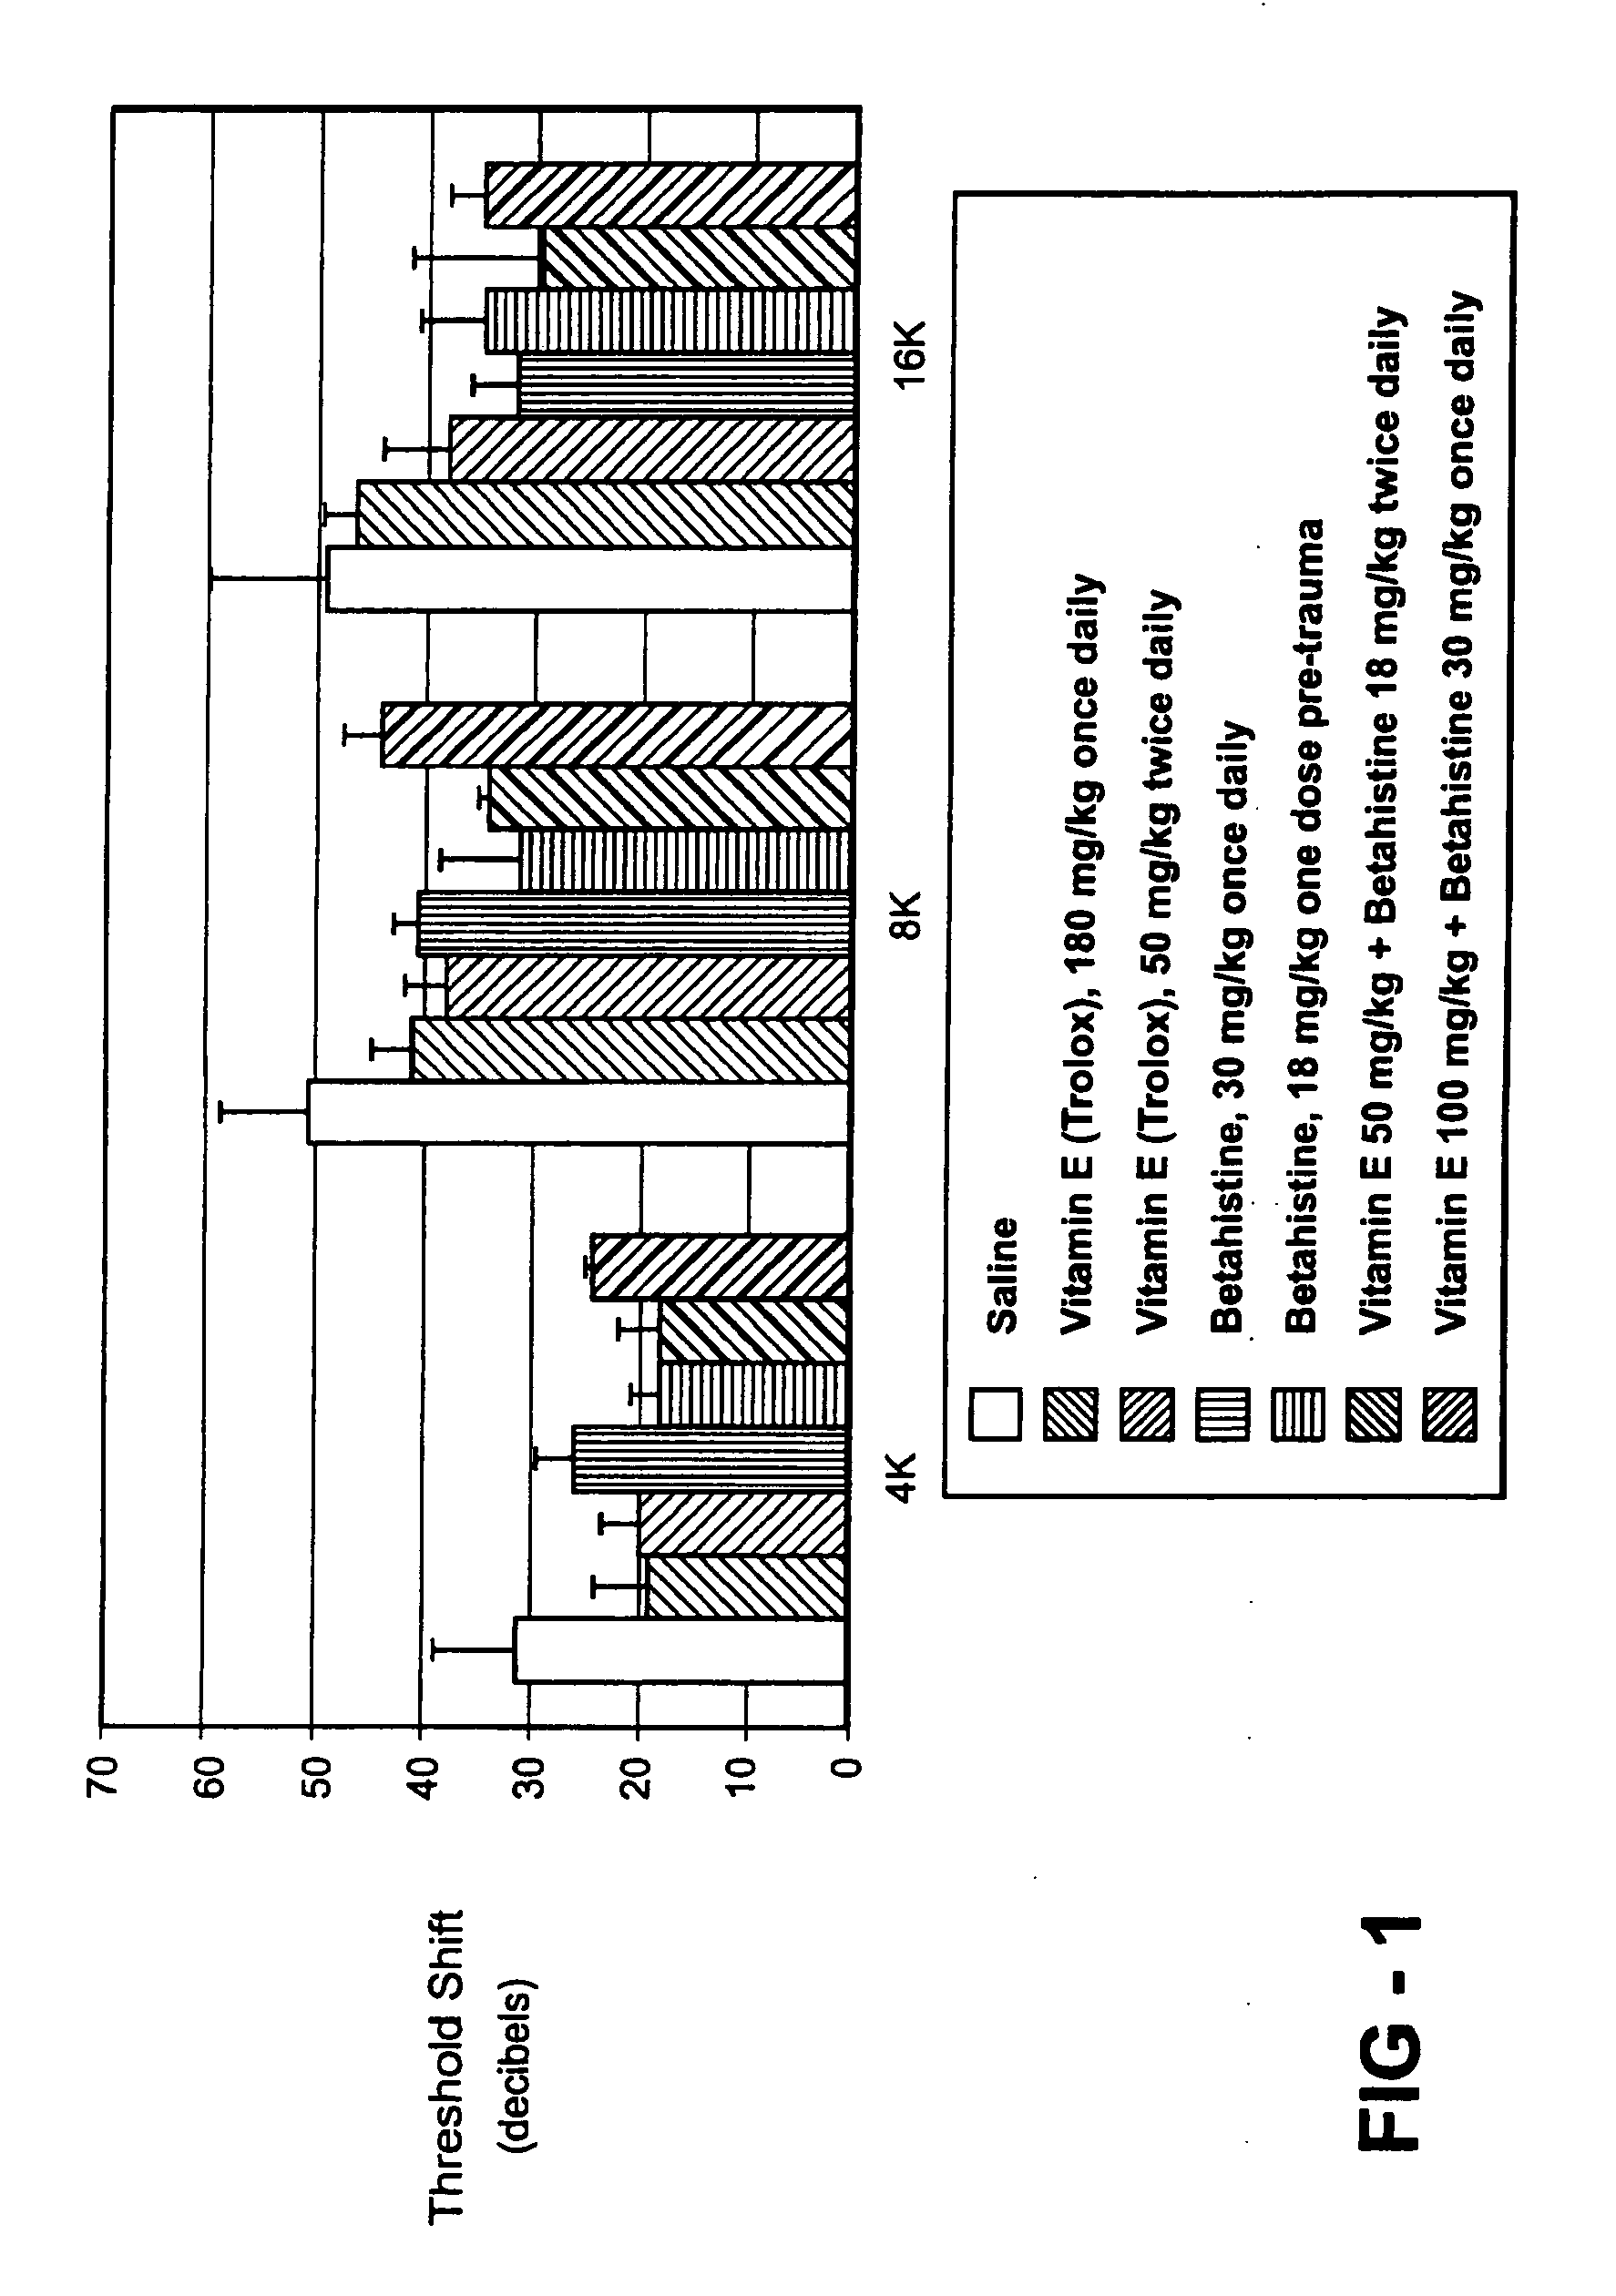 Composition and method of treating temporary and permanent hearing loss